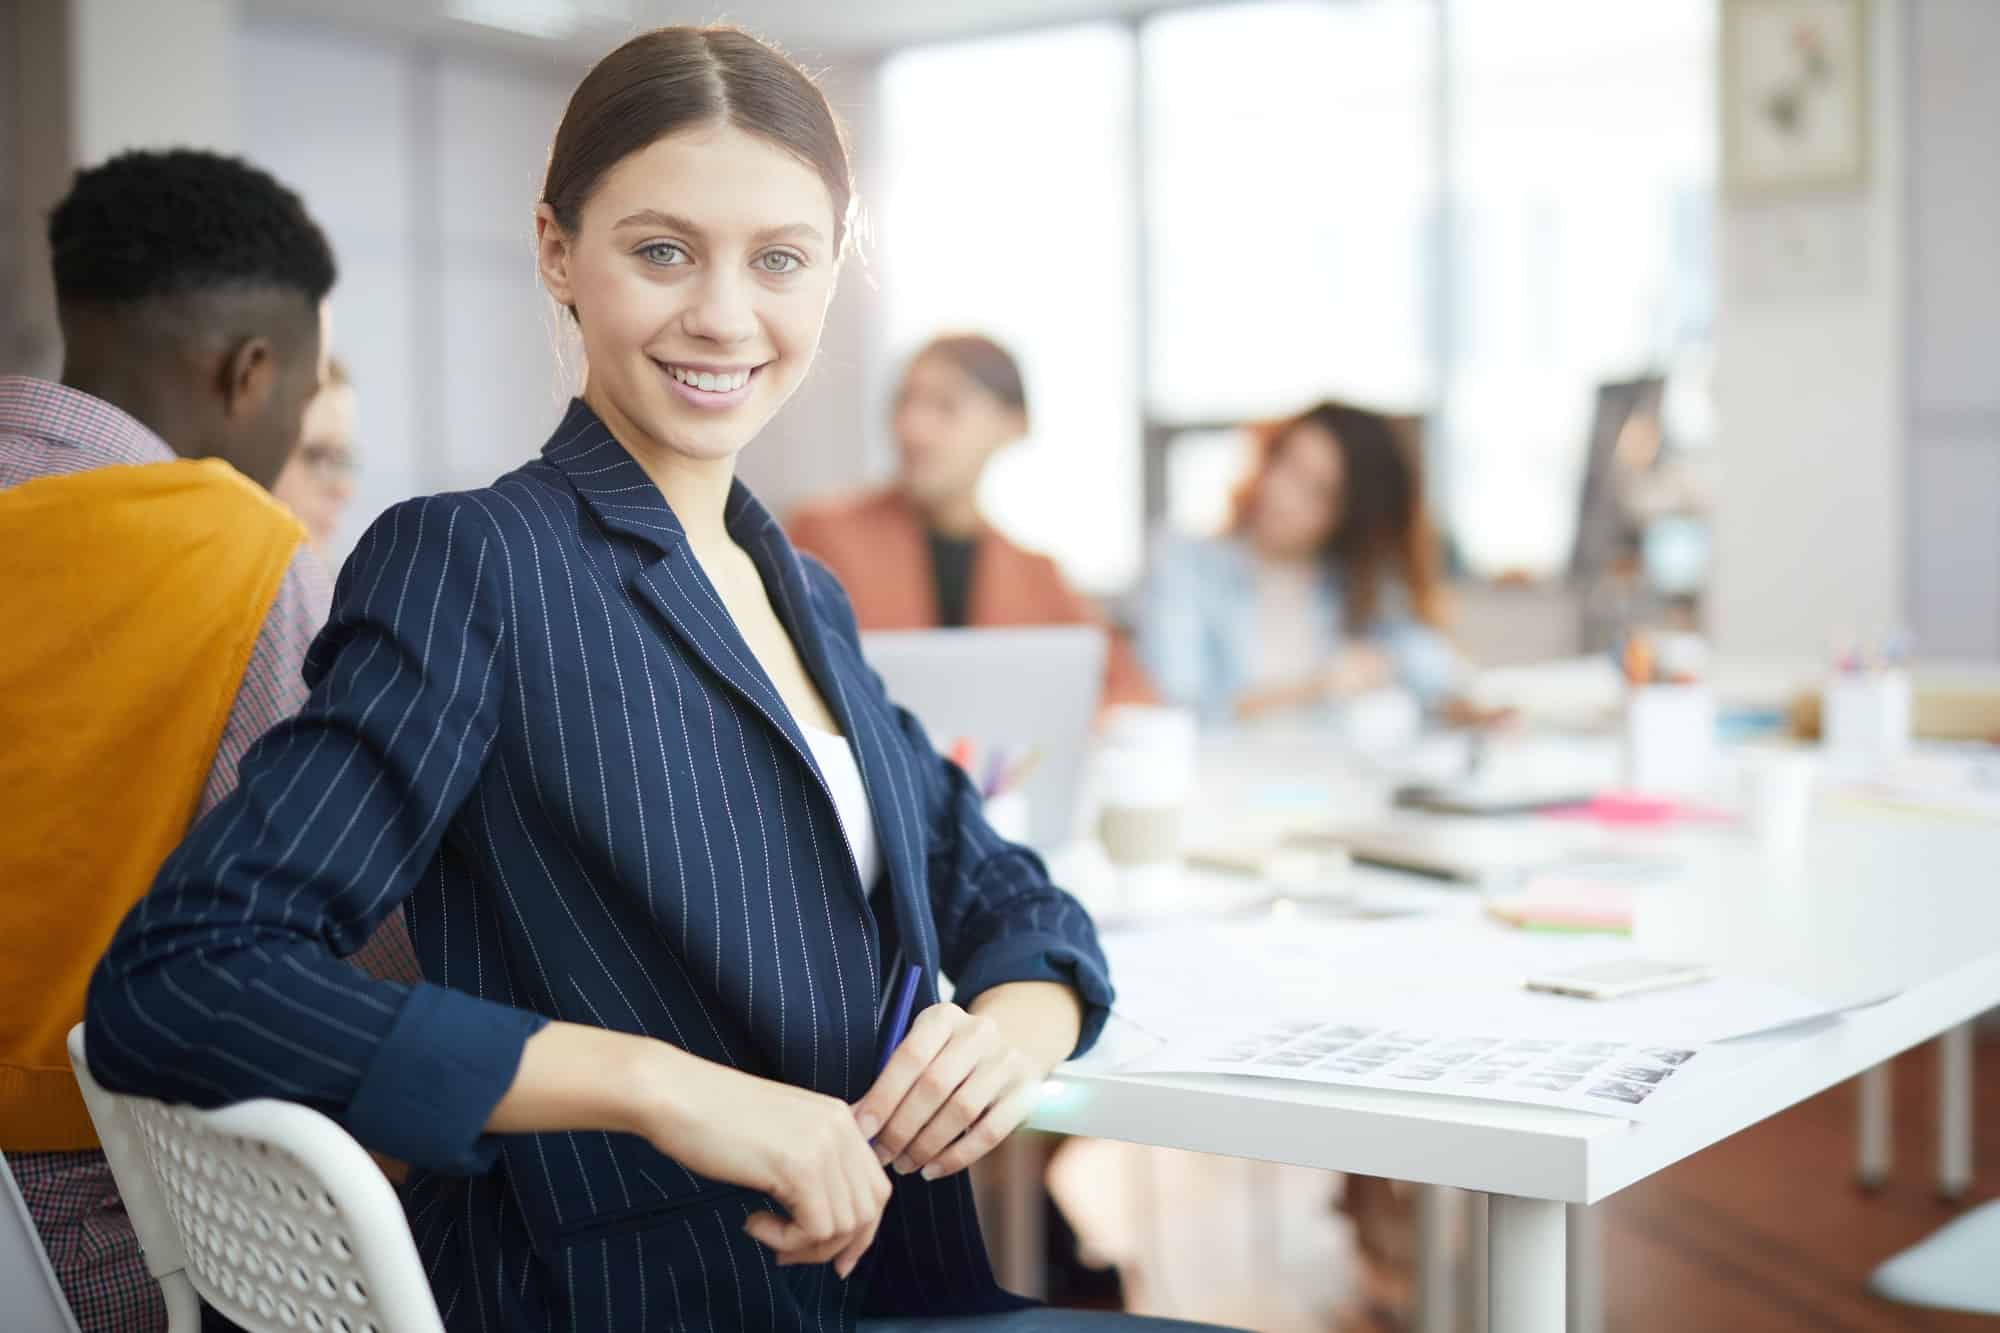 Smiling Businesswoman Posing in Production Agency